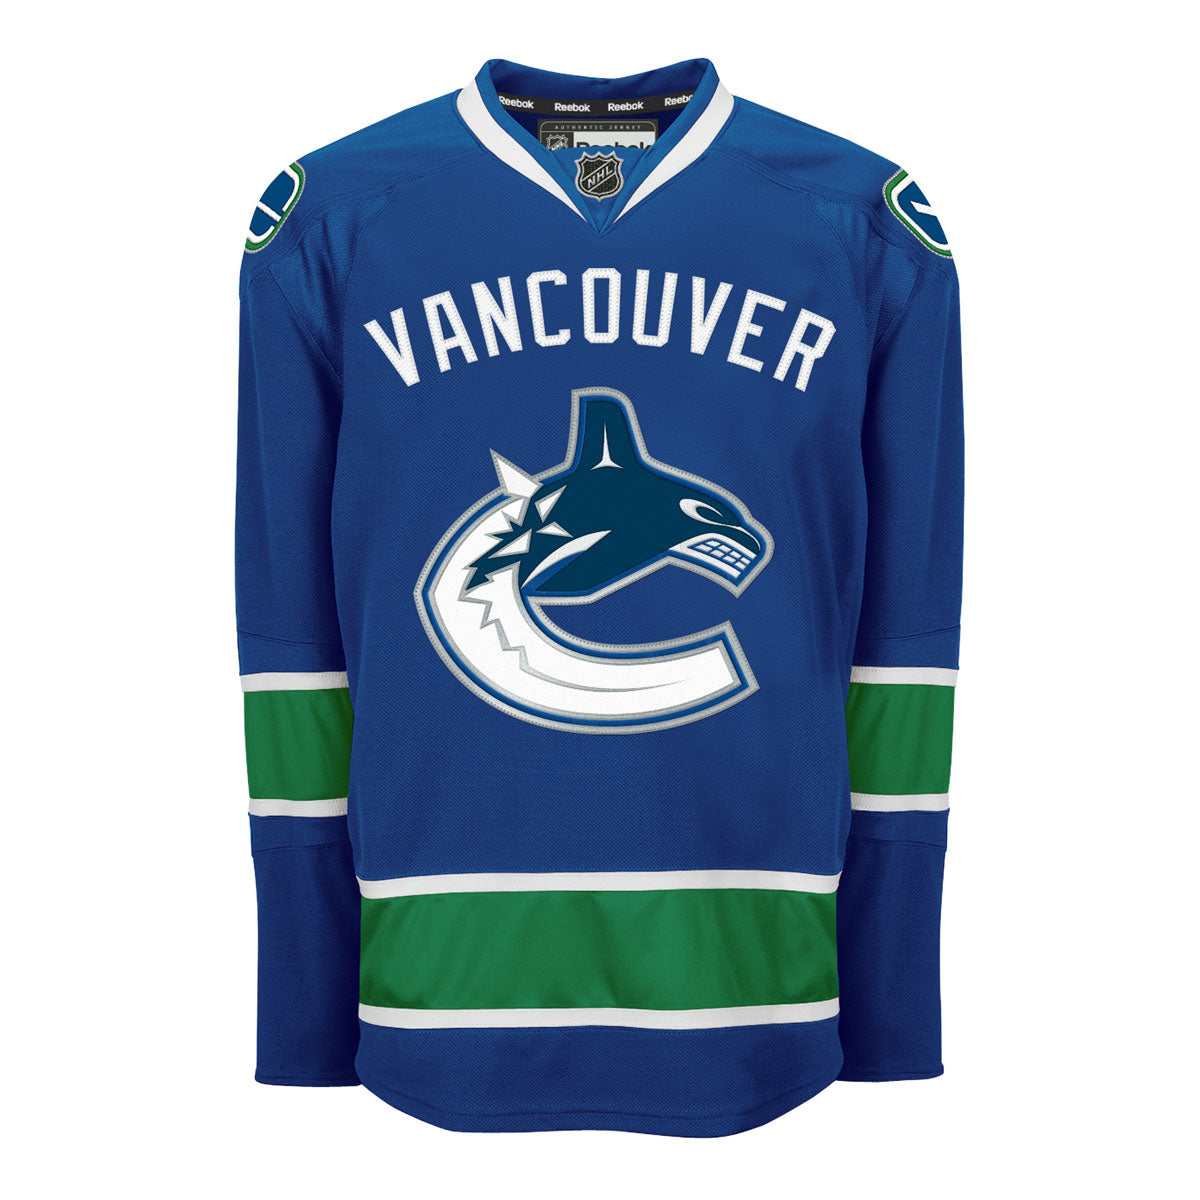 With a new manufacturer and a possible jersey patch sponsor next season,  the Canucks' uniforms could soon look different - CanucksArmy